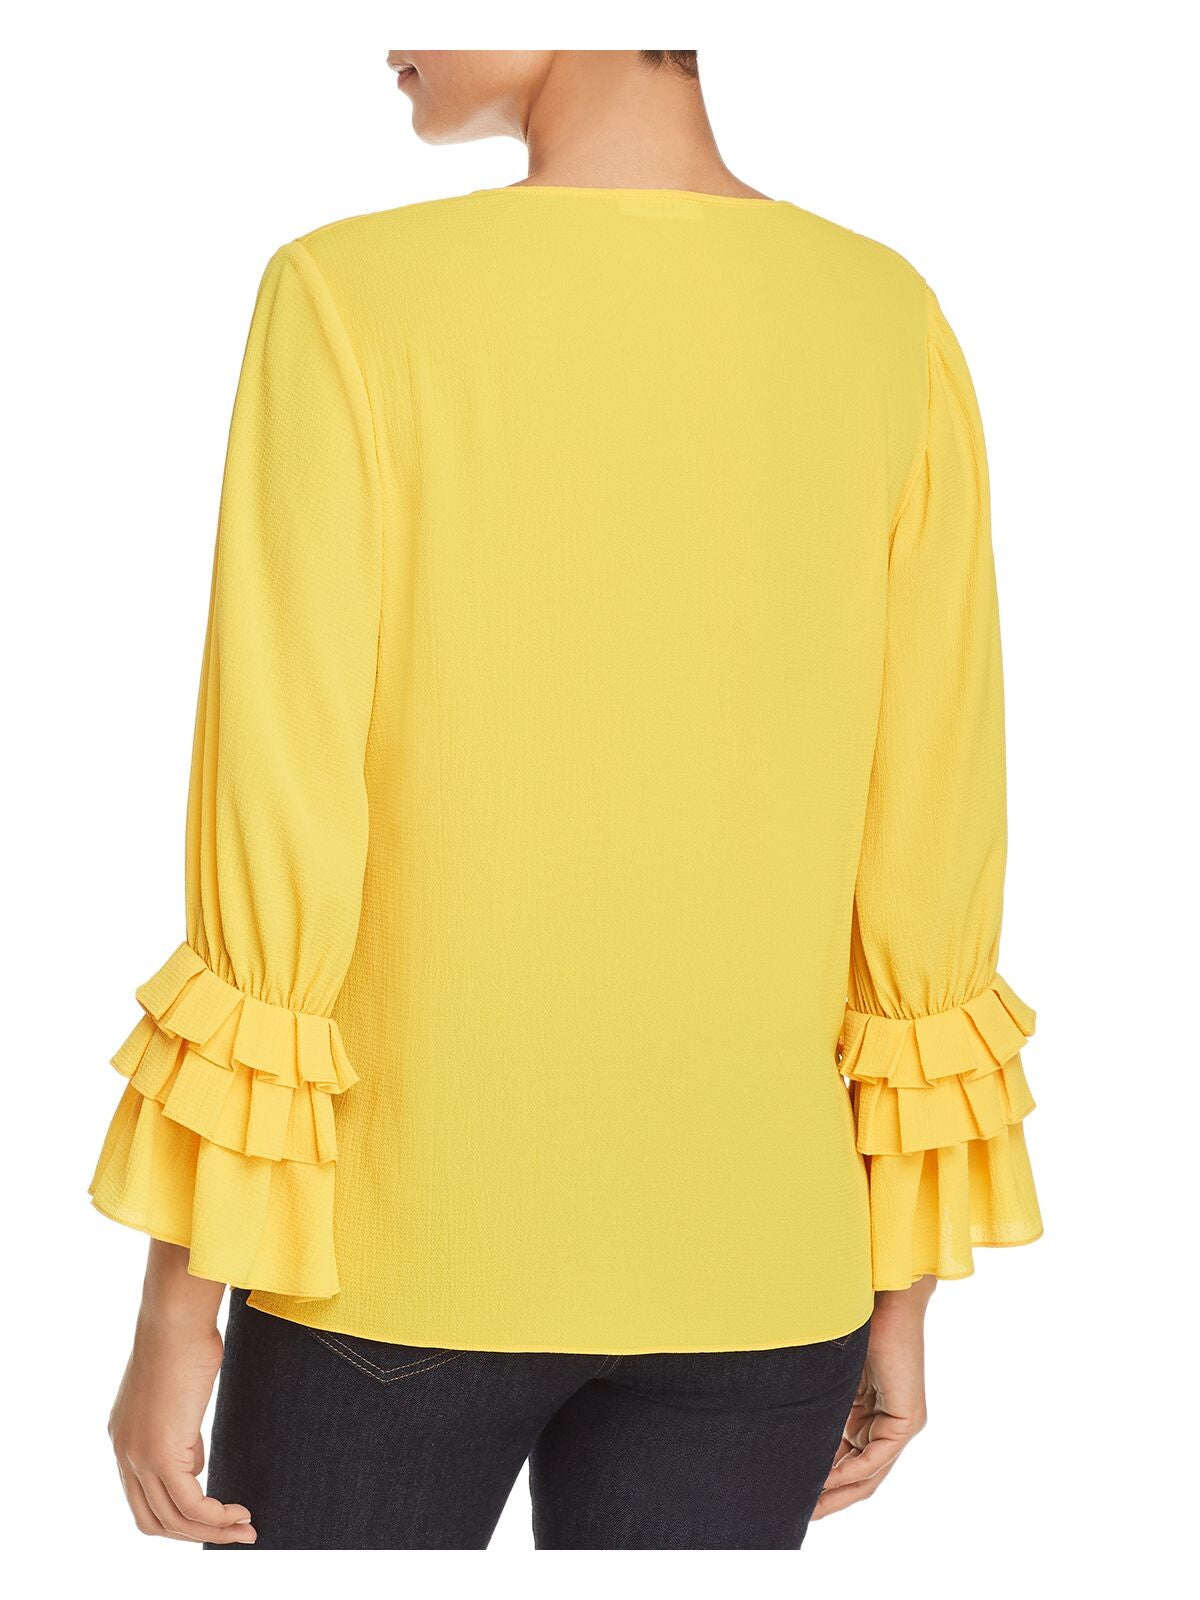 LE GALI Womens Yellow Floral Bell Sleeve V Neck Top S